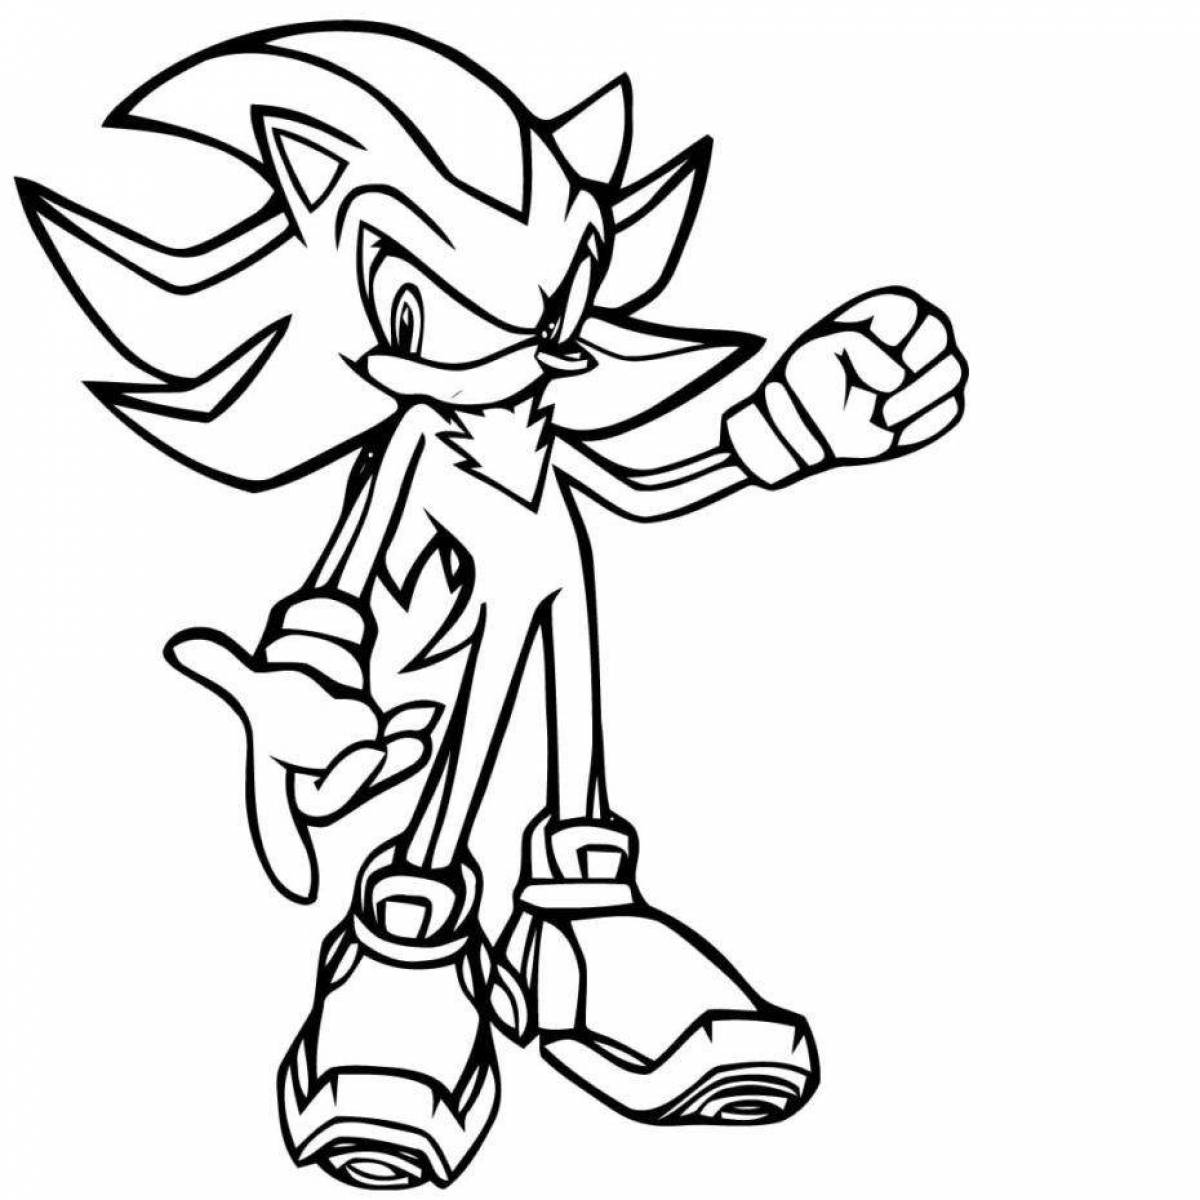 Funny coloring drawing of sonic